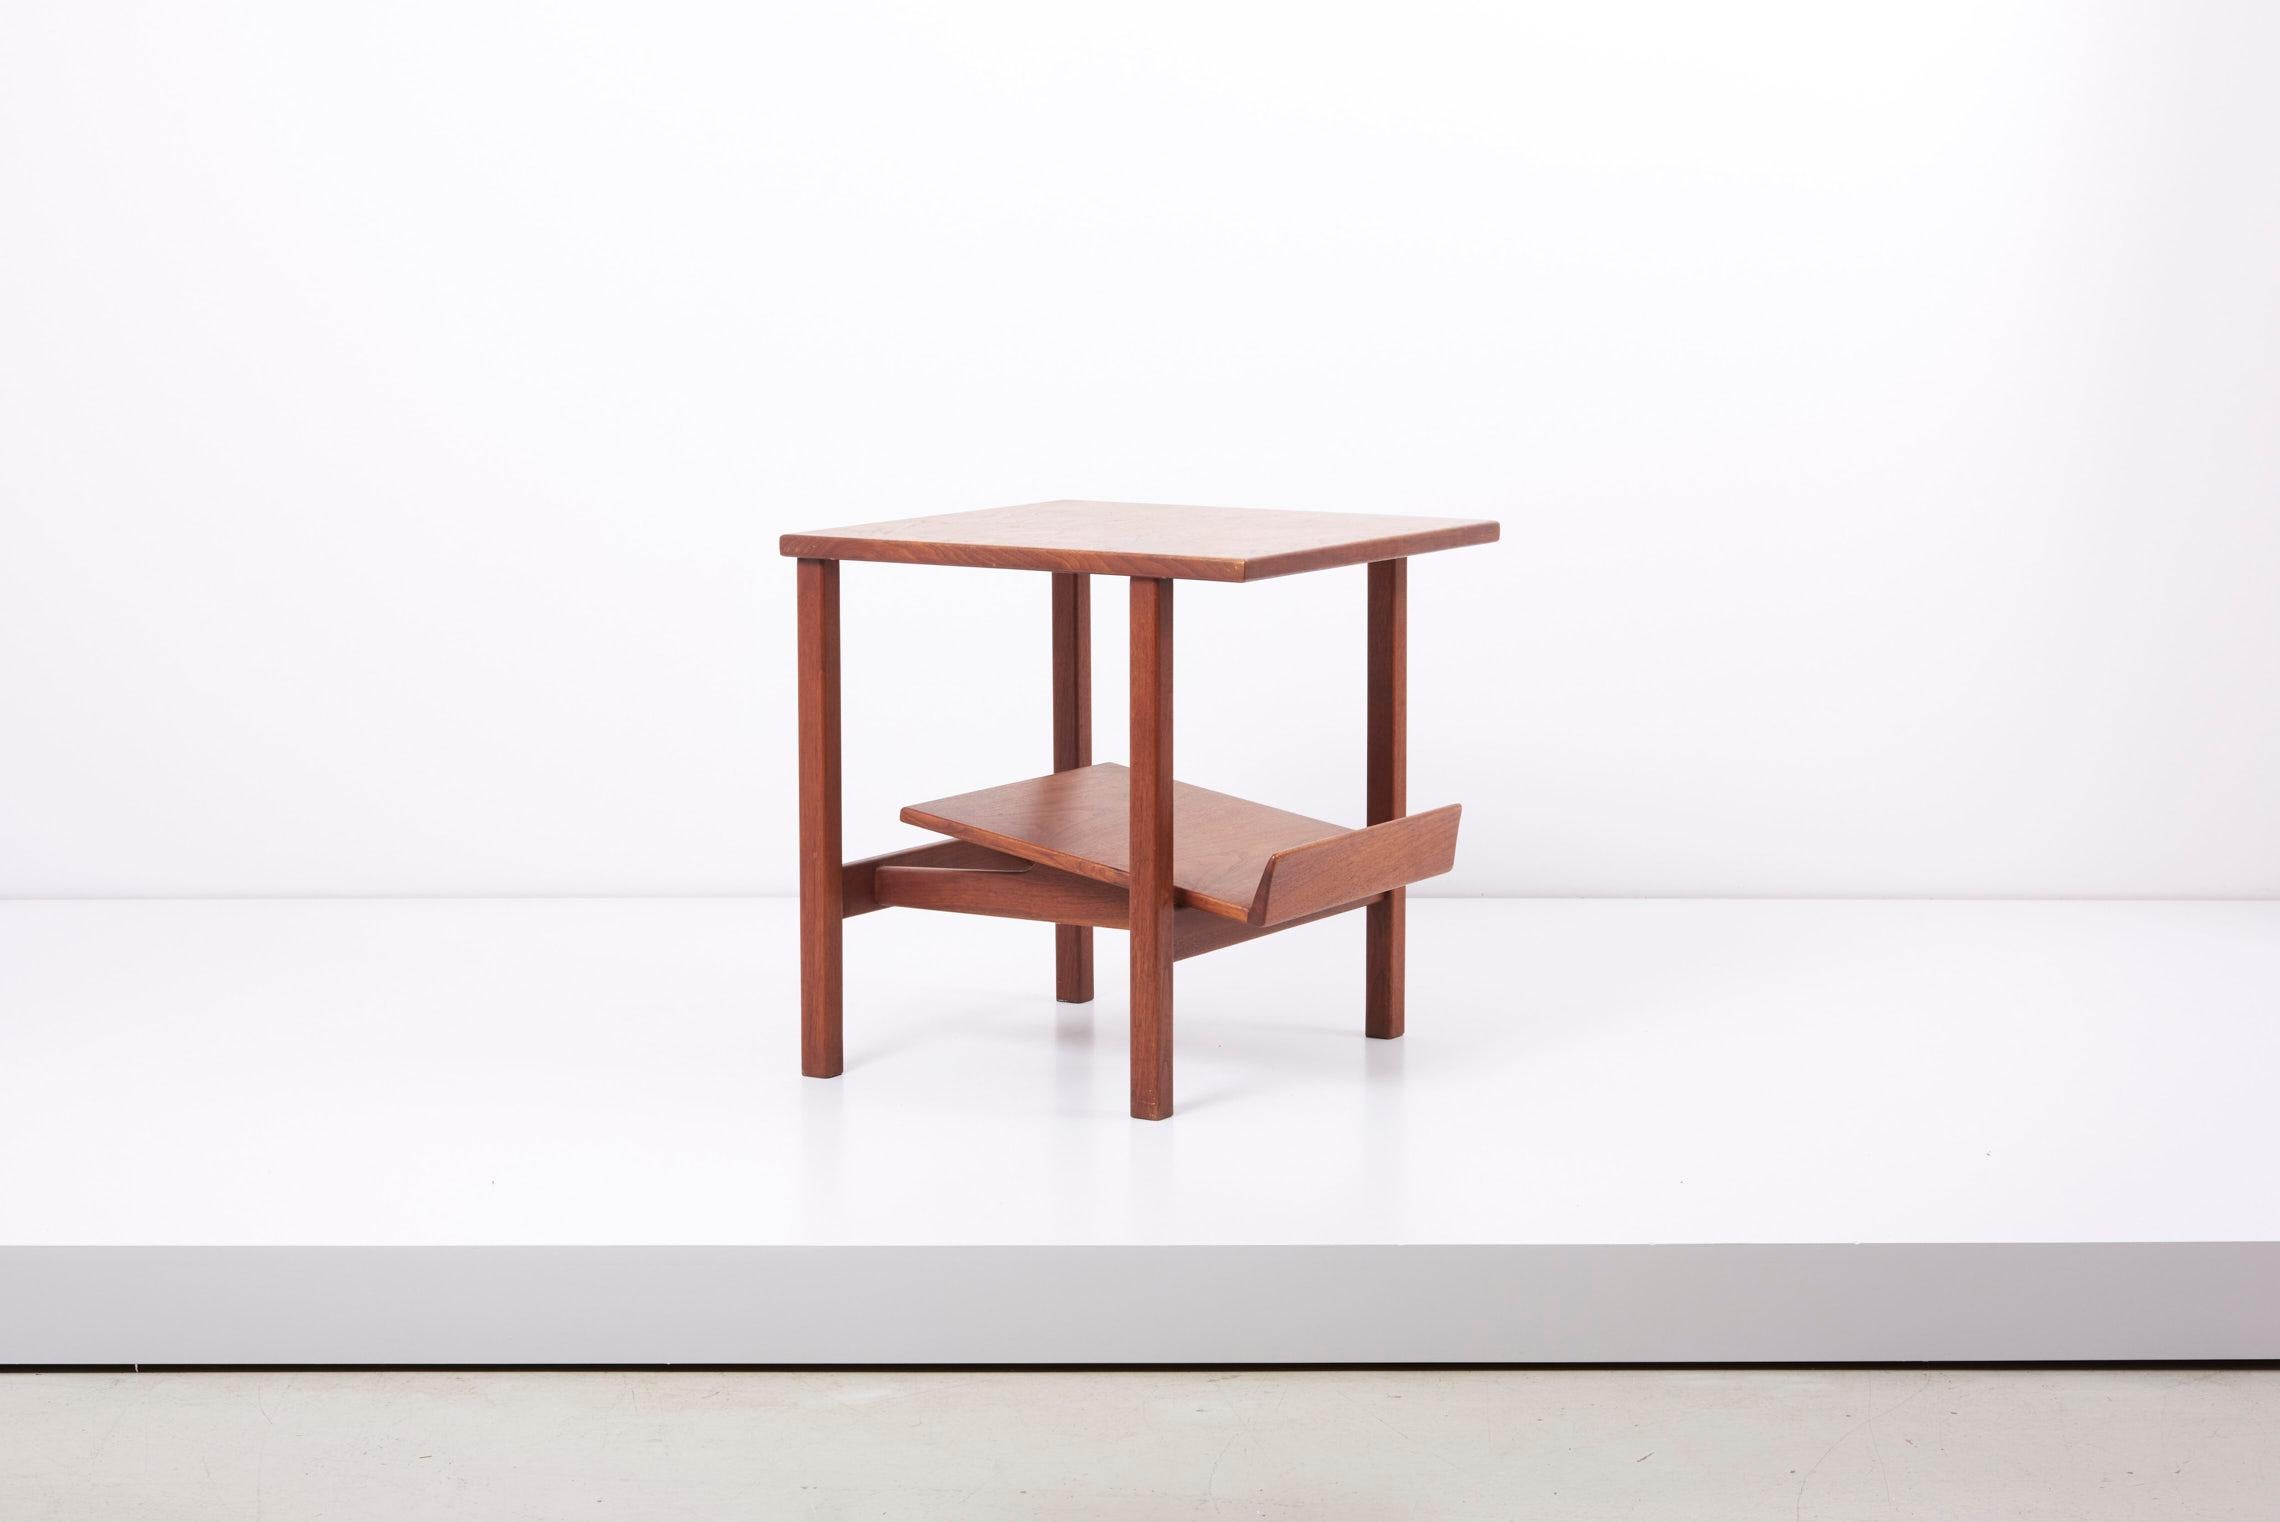 Side table by Jens Risom for Risom Inc. US, 1950s.
This Table is made out of Walnut and carries a tray for books or magazines.